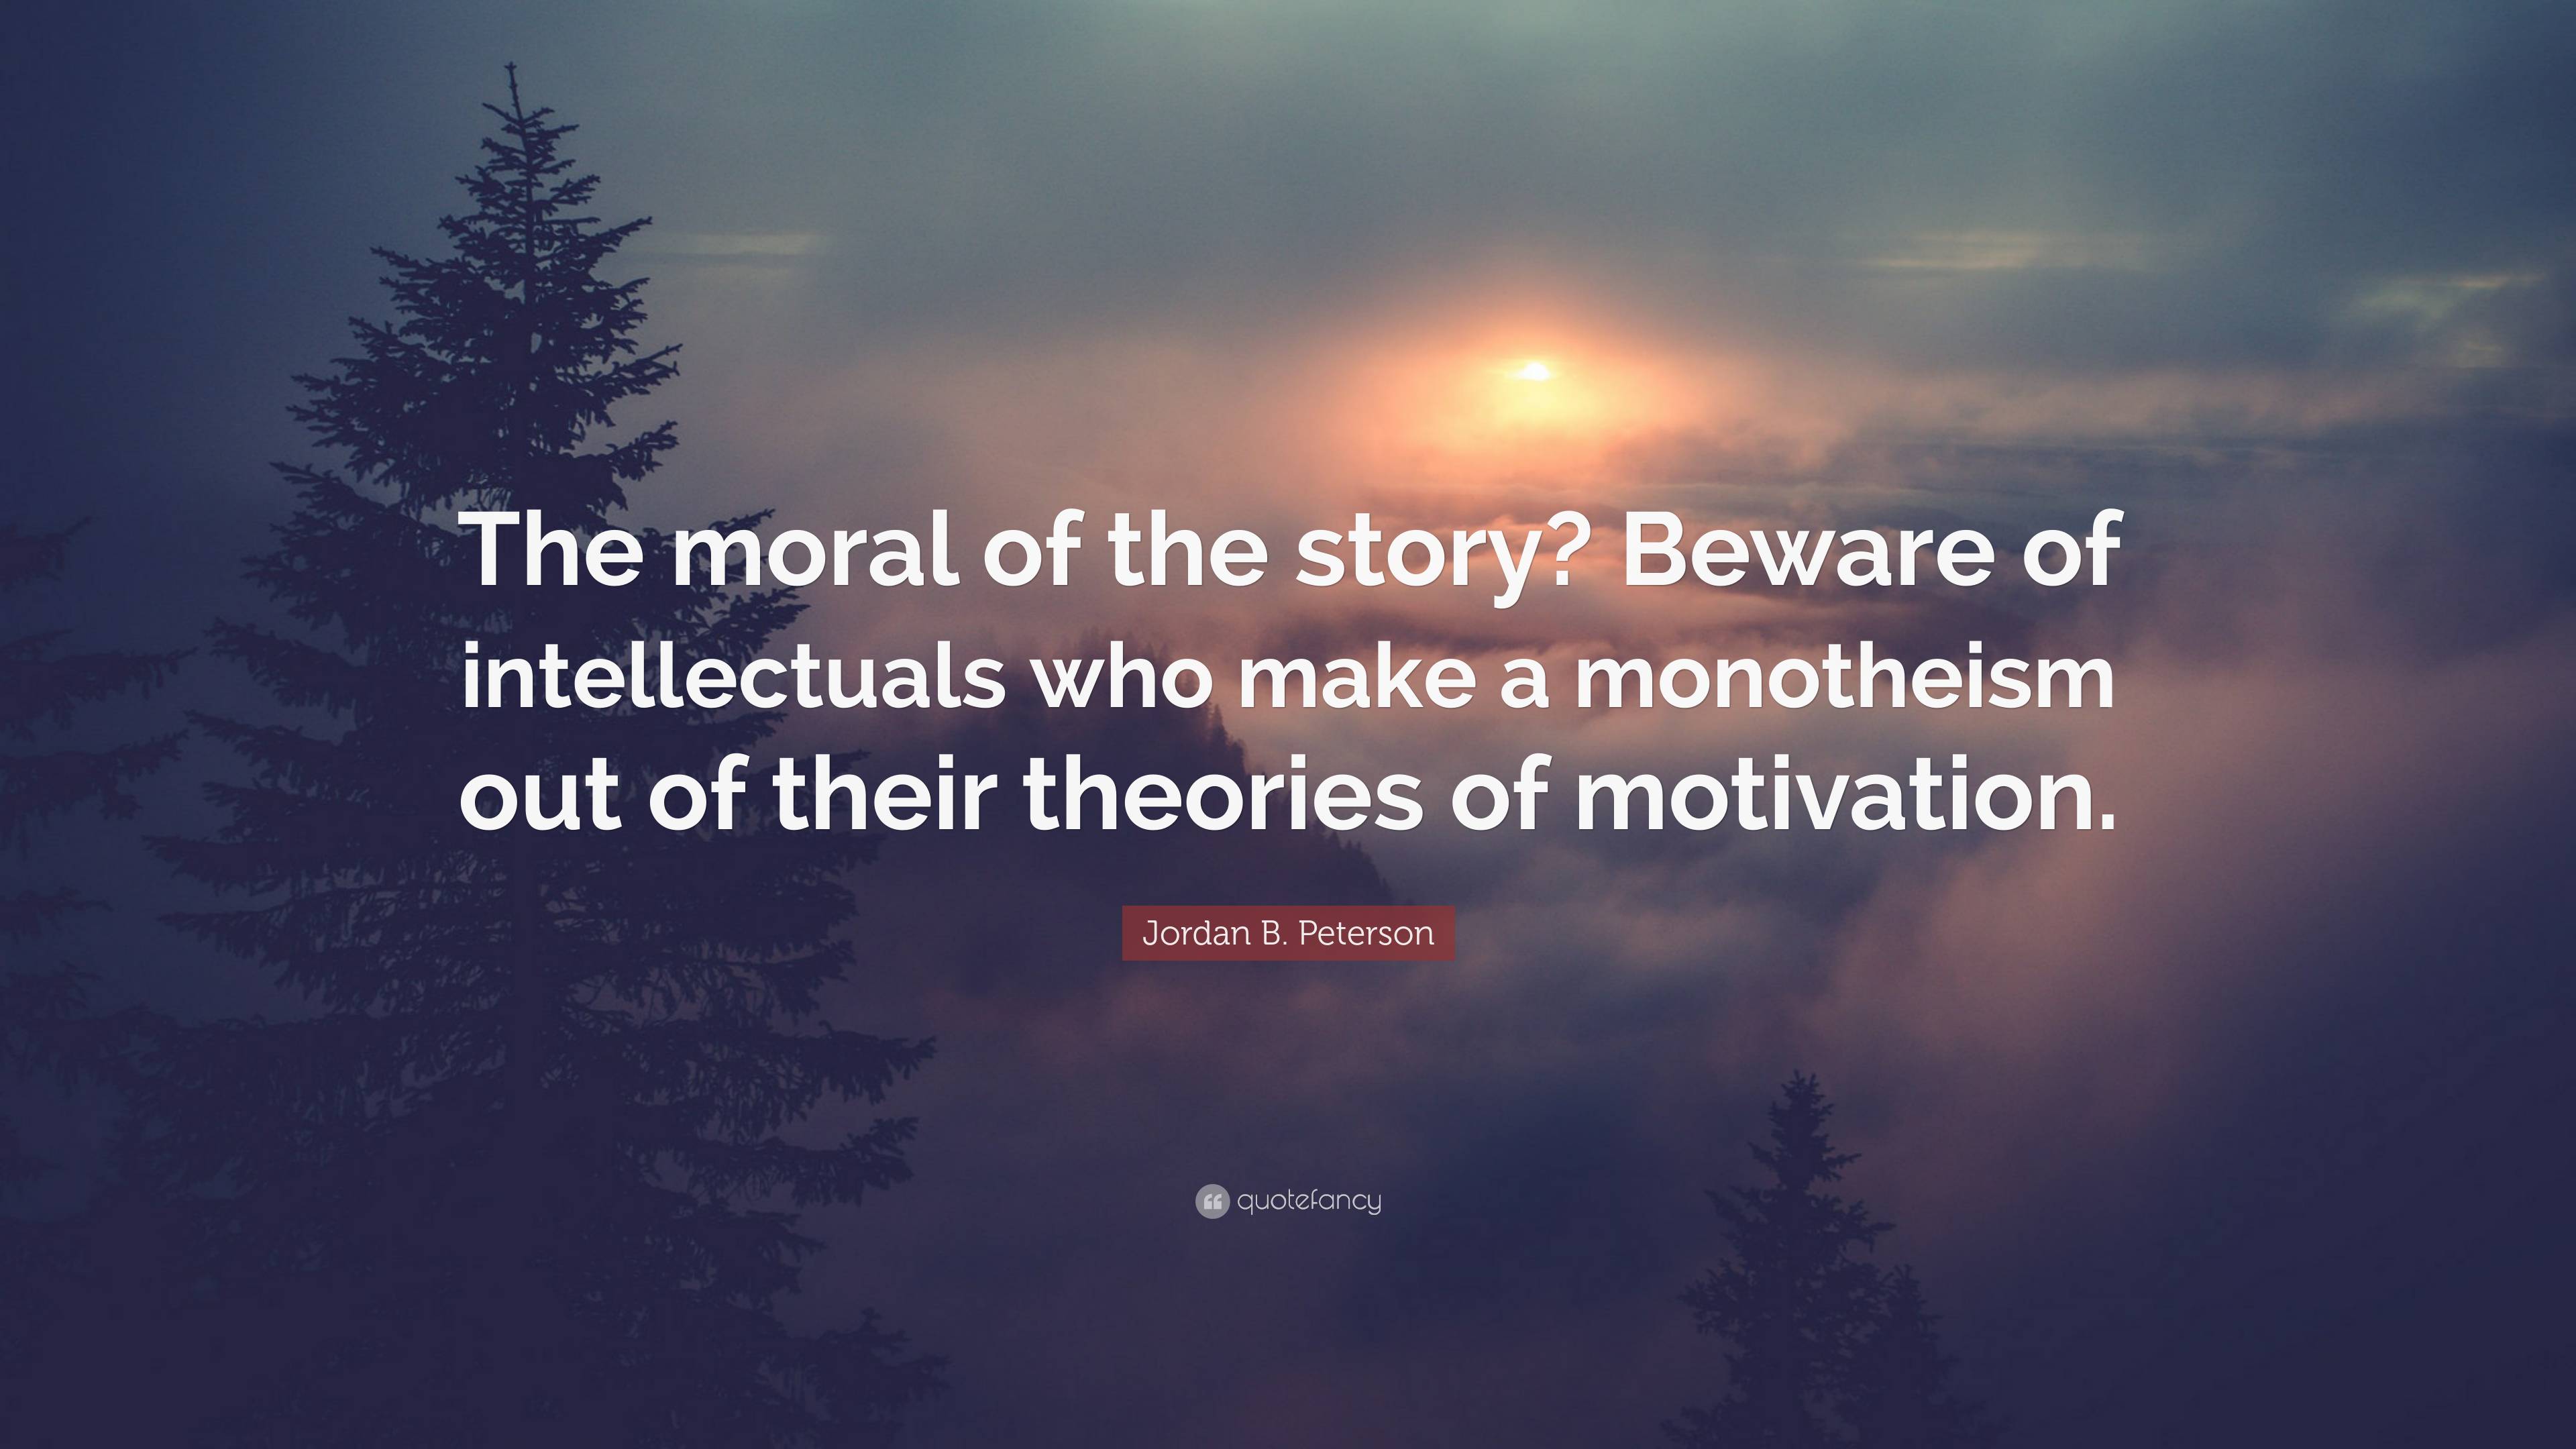 Jordan B. Peterson Quote: “The moral of the story? Beware of ...